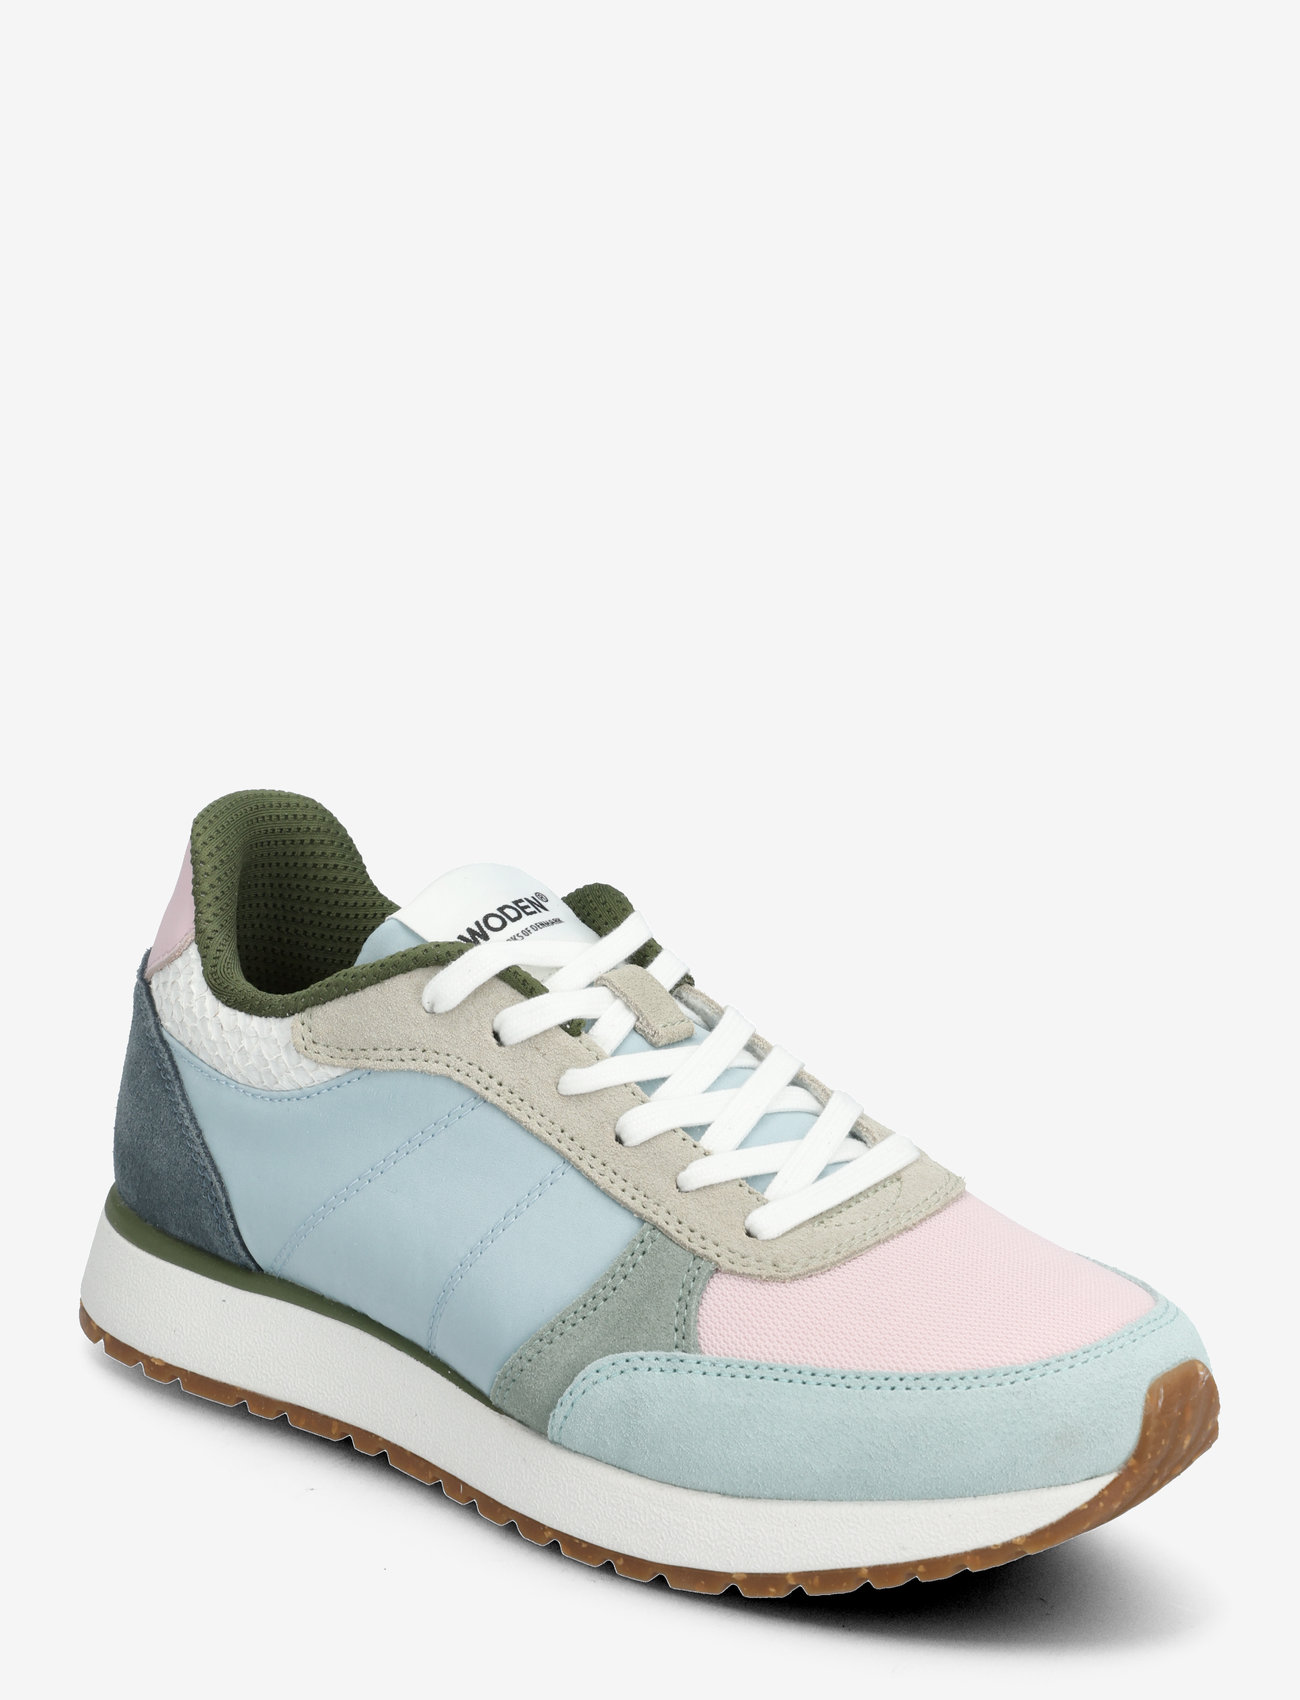 WODEN - Ronja - lave sneakers - ice blue multi - 0